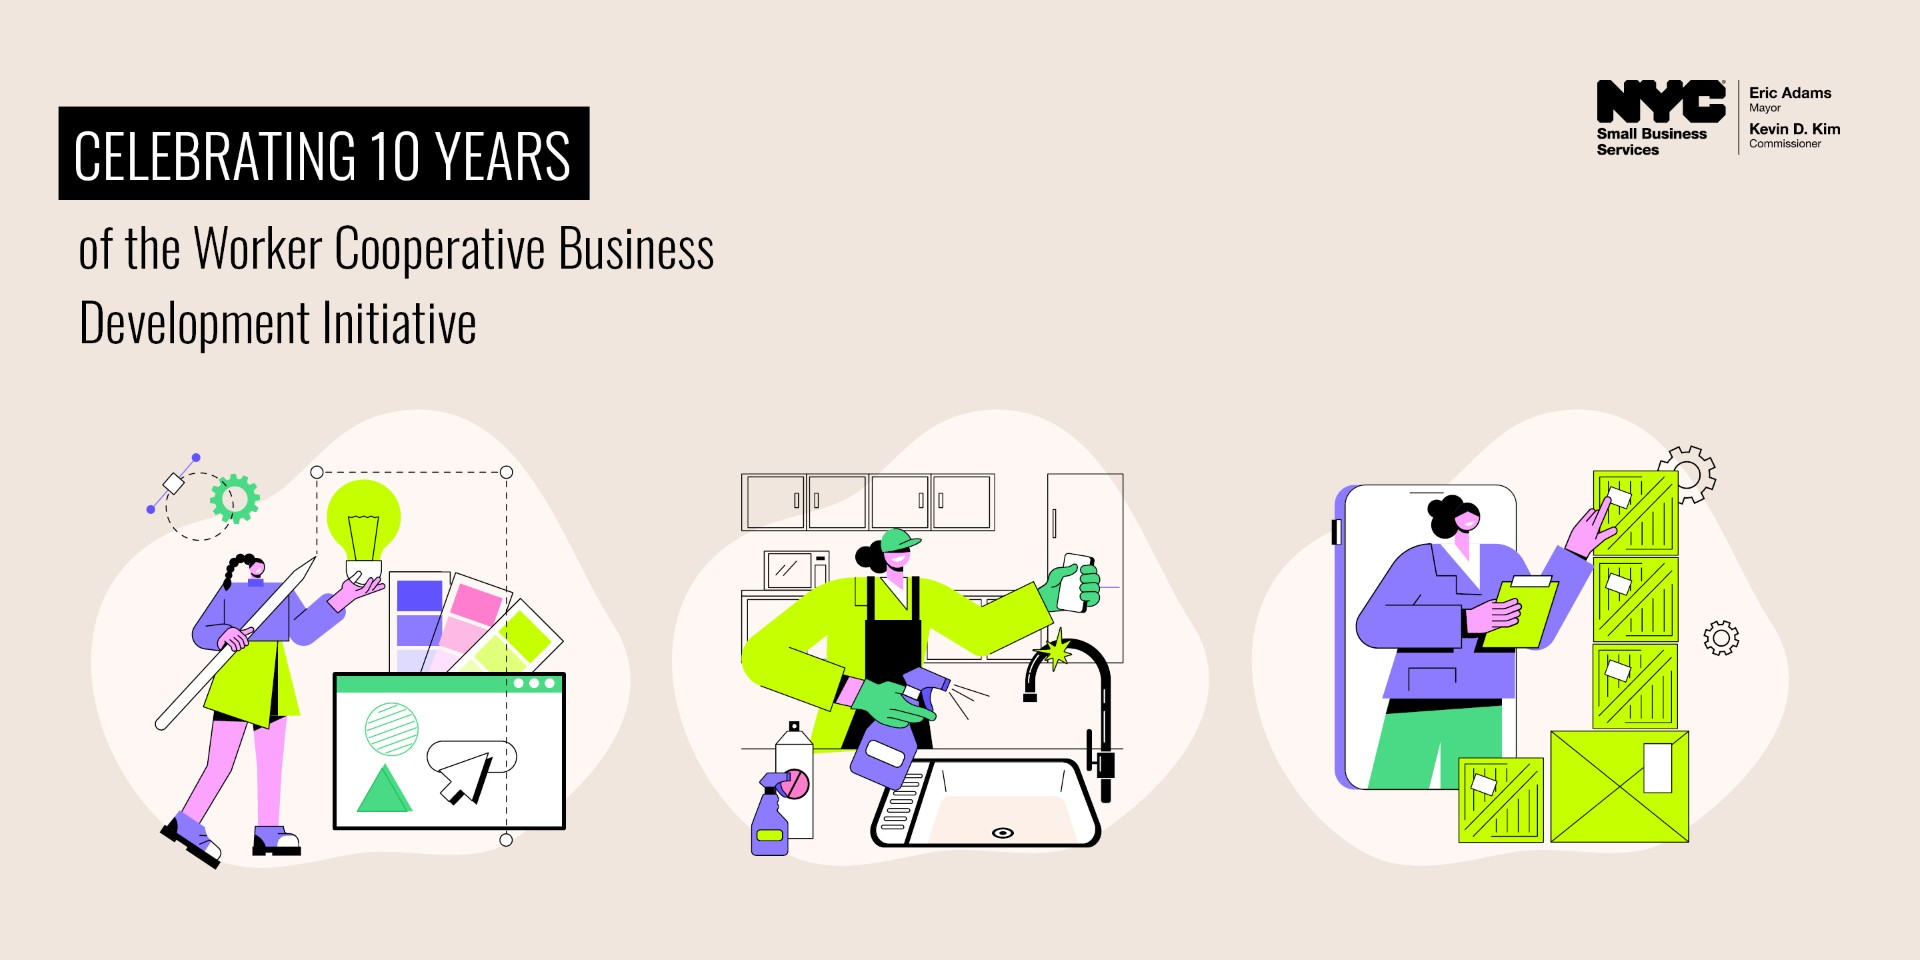 Graphic featuring illustrations of three different types of businesses with SBS logo and text "Celebrating 10 Years of the Worker Cooperative Business Development Initiative"